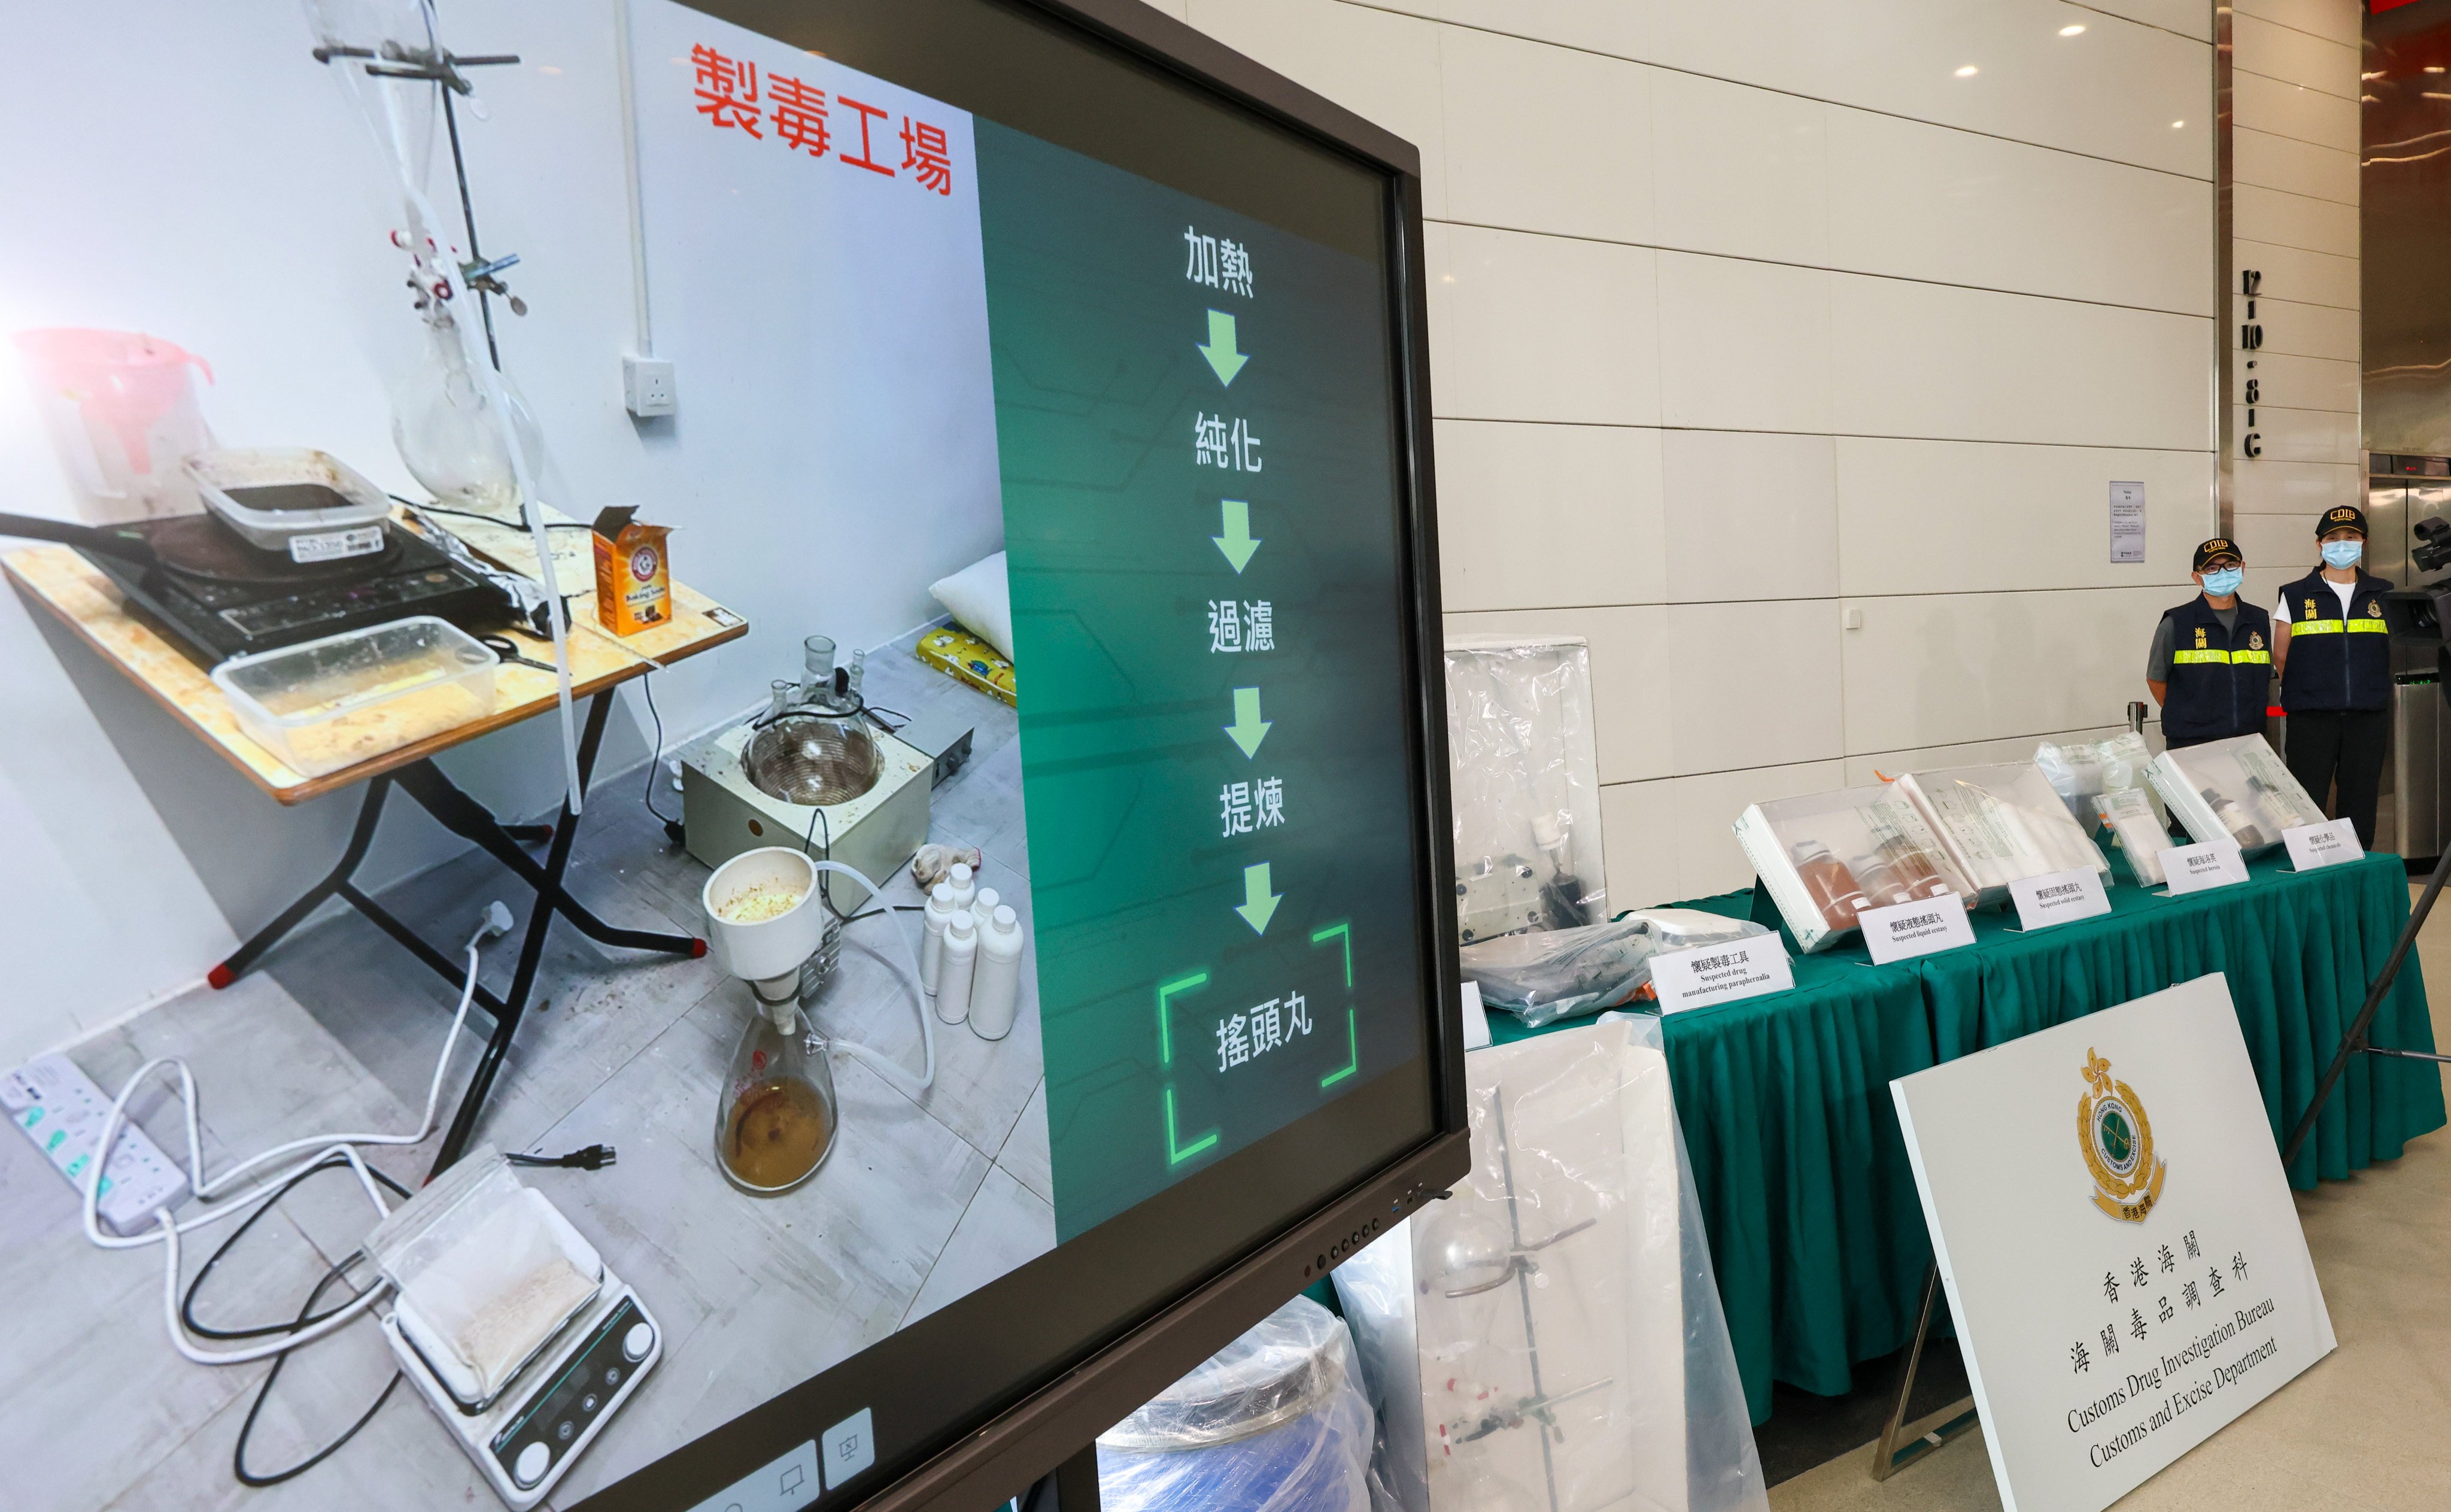 Customs displays an image of the Ecstasy lab that had been allegedly set up by a 19-year-old in a Tai Kok Tsui office. Photo: Jelly Tse